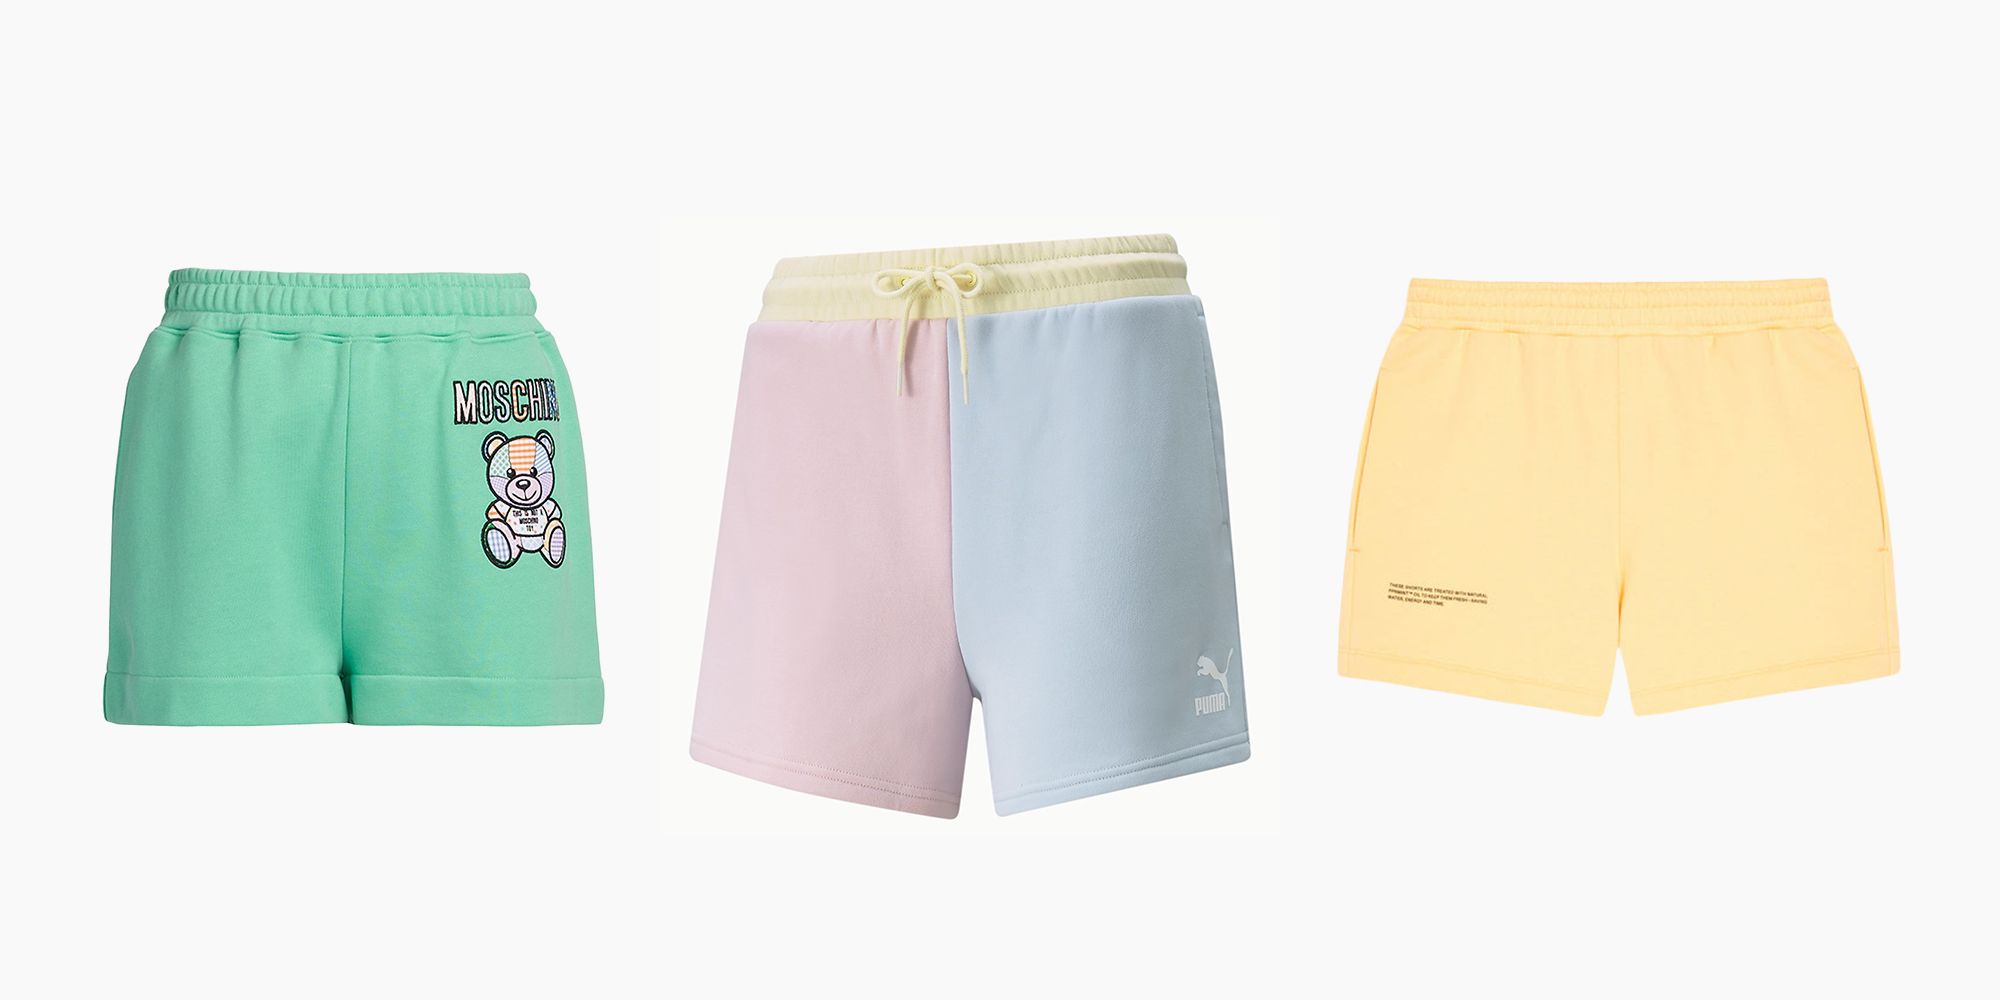 Sweat Shorts Are the Best Way to Stay Cool This Summer—Literally and Figuratively